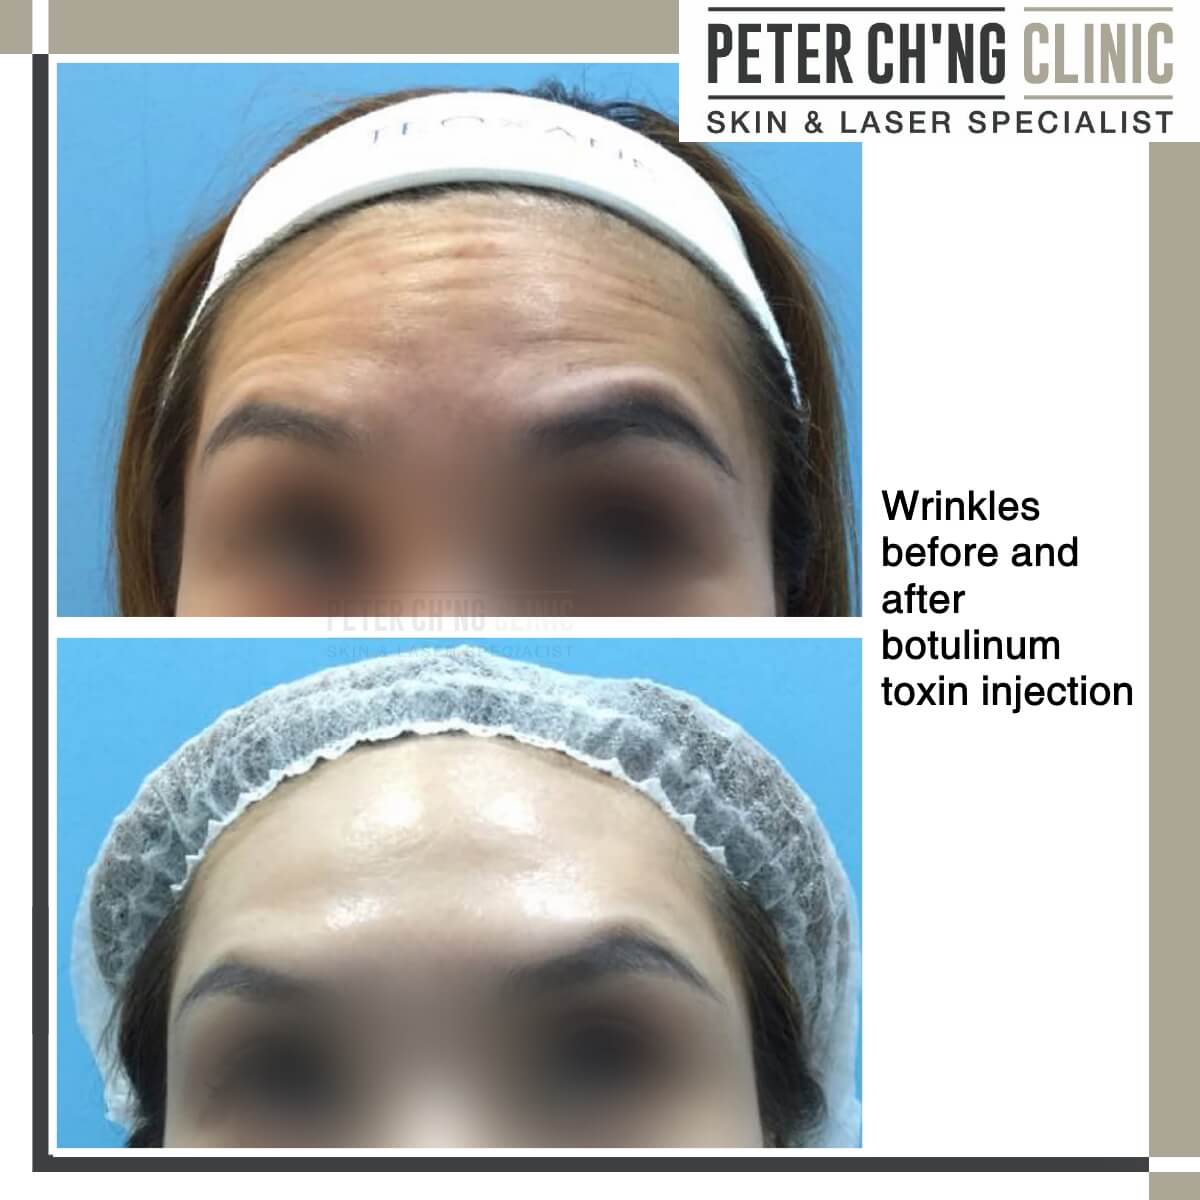 Wrinkles before and after botox